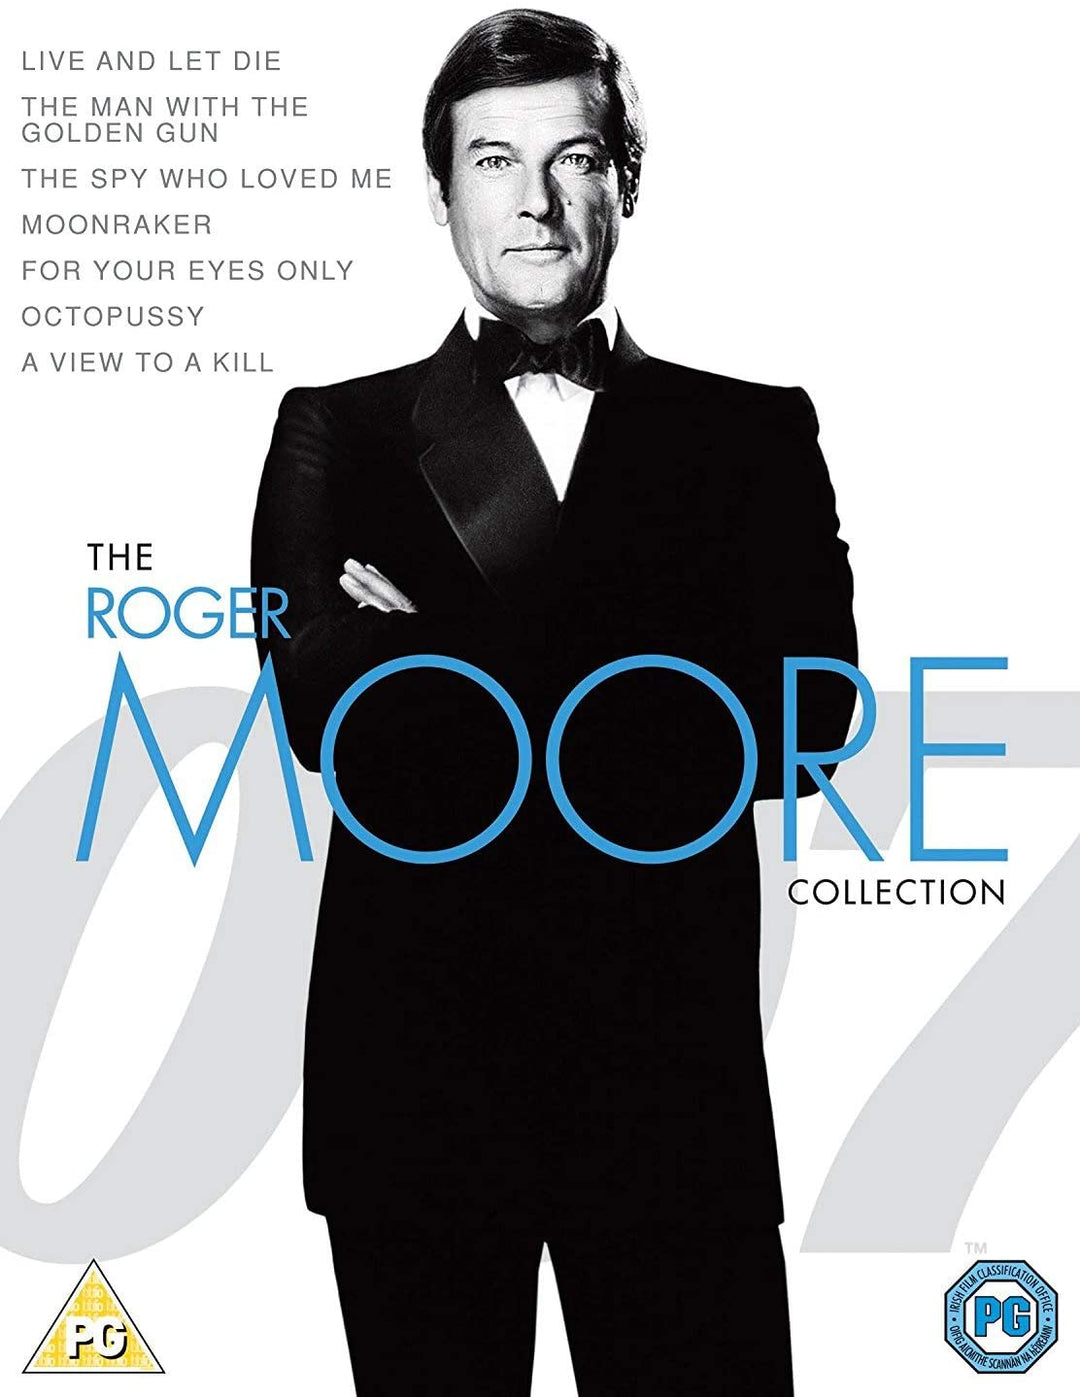 James Bond: The Roger Moore Collection [2015] [2017] - Action/Adventure [DVD]